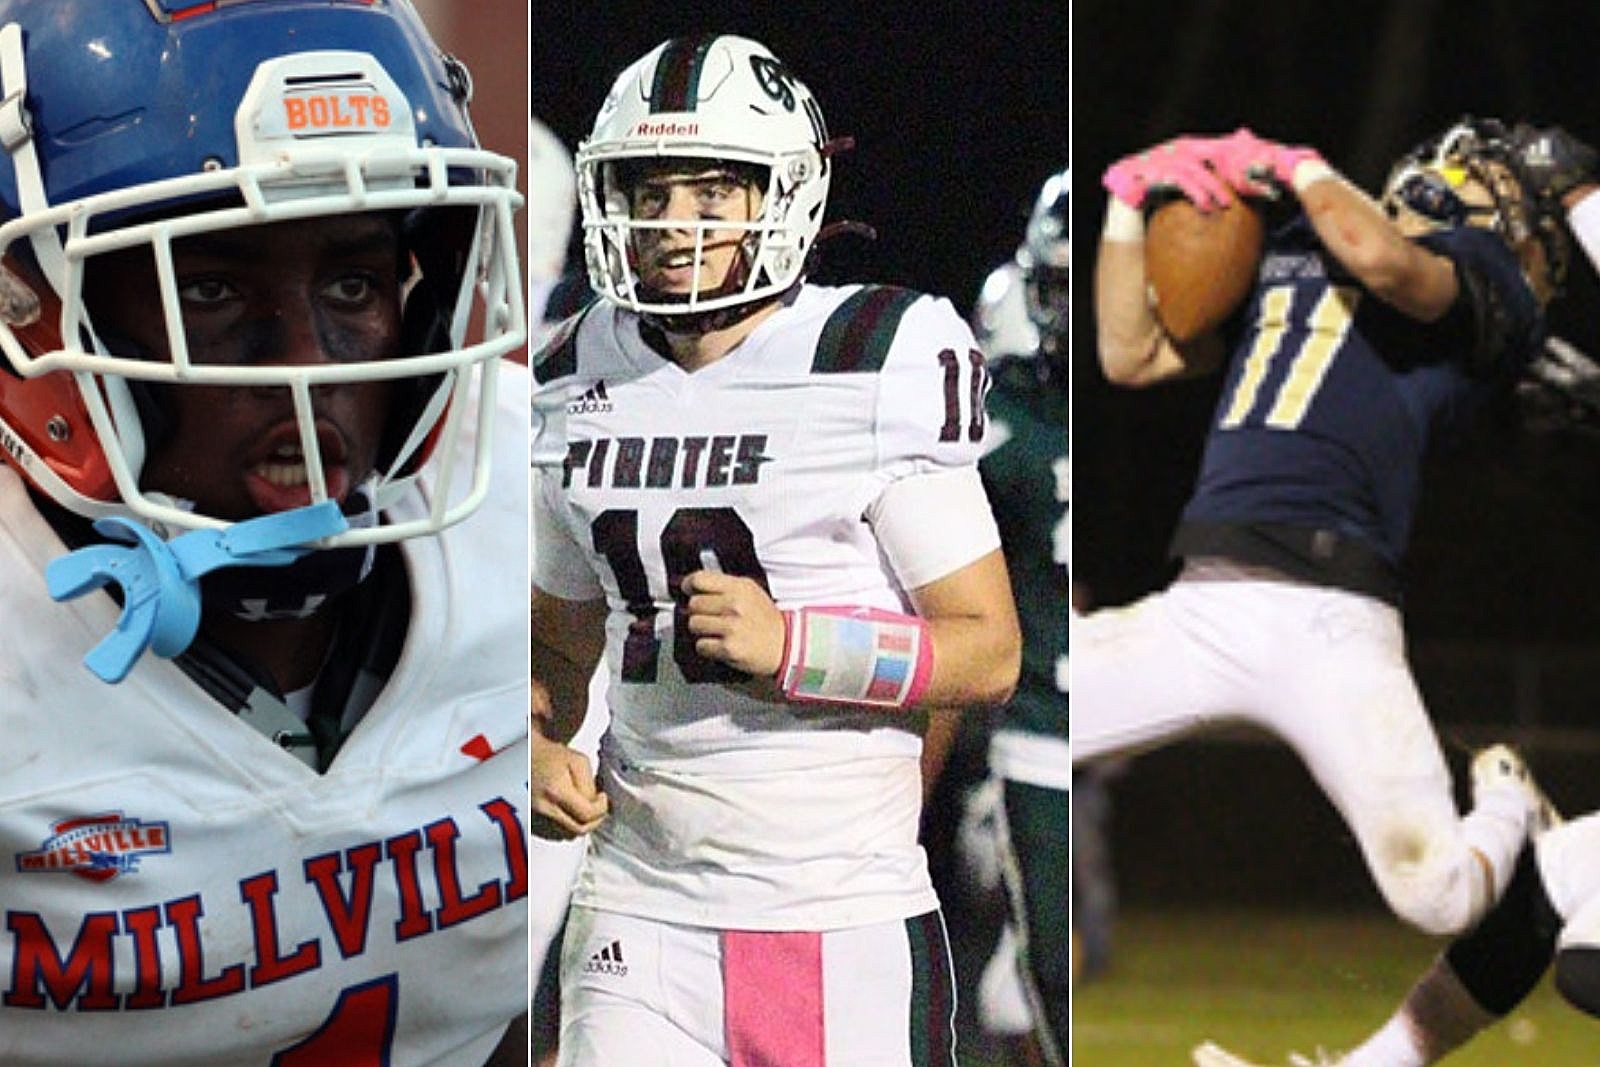 Top Ten Highlights from the 2021 South Jersey HS Football Season